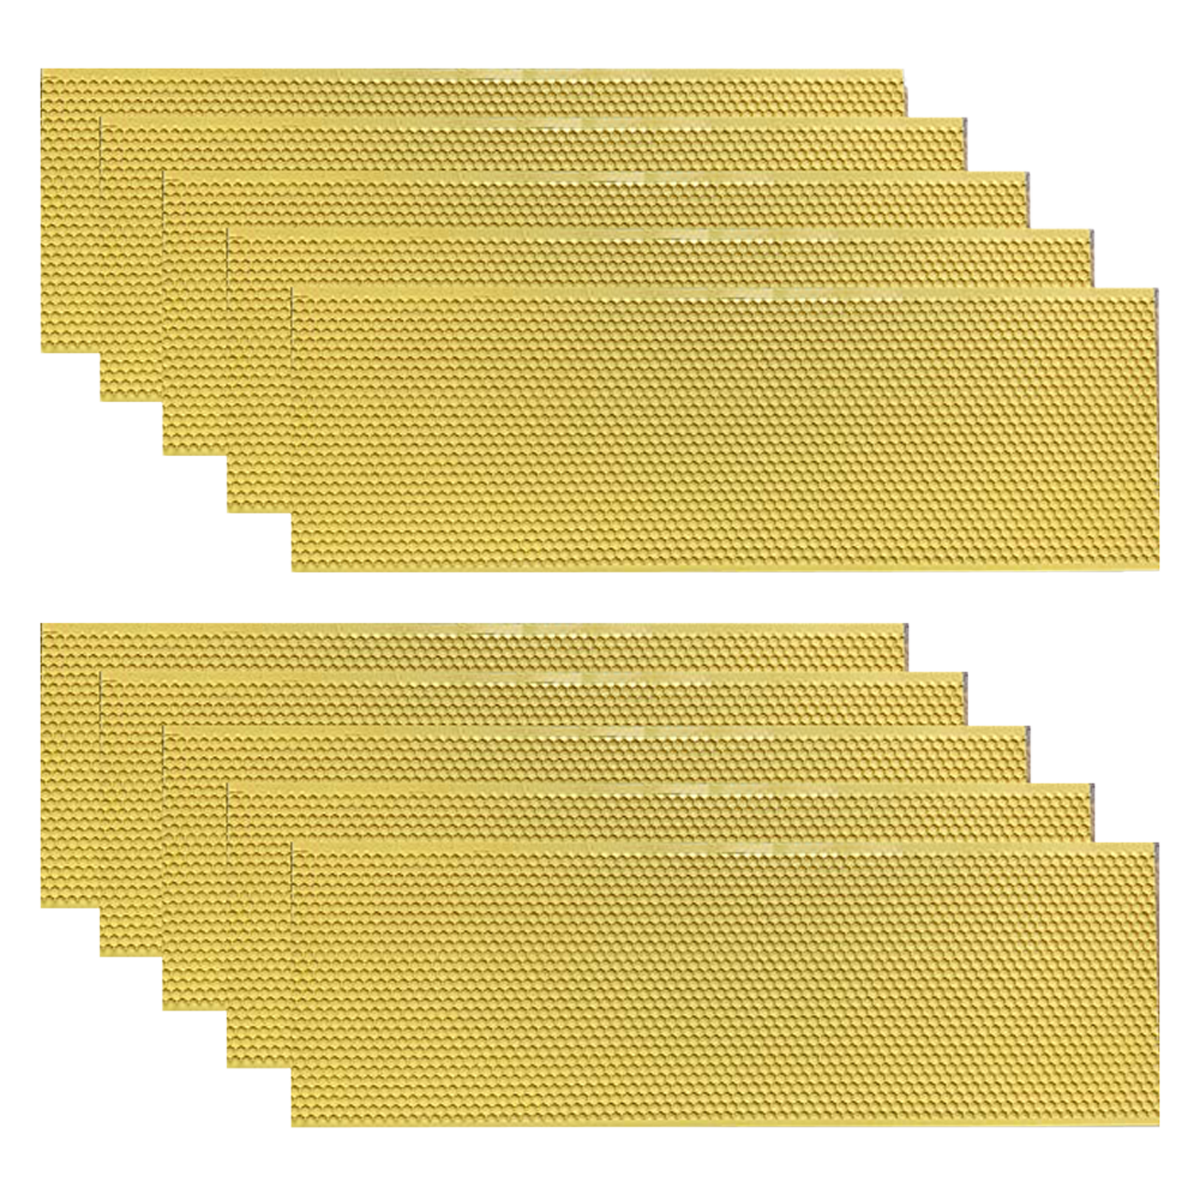 Beeswax Foundation Sheet Comb Foundation Natural Beeswax Sheets for Bees -  China Beeswax Foundation Sheet, Bee Comb Foundation Sheet